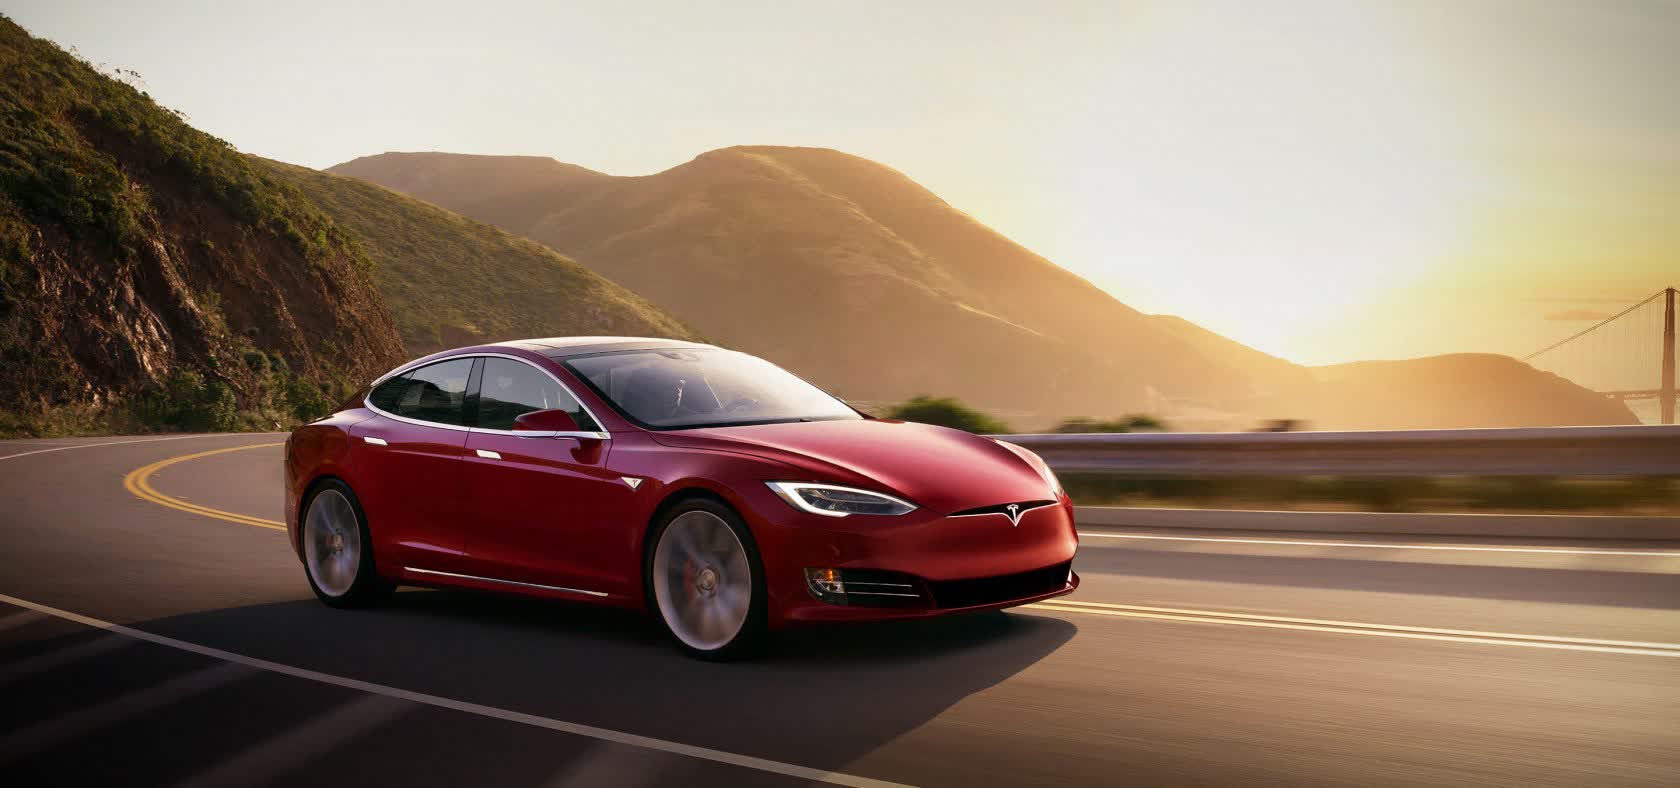 Tesla weakens its 4-year used vehicle warranty days after scrapping its 7-day return policy